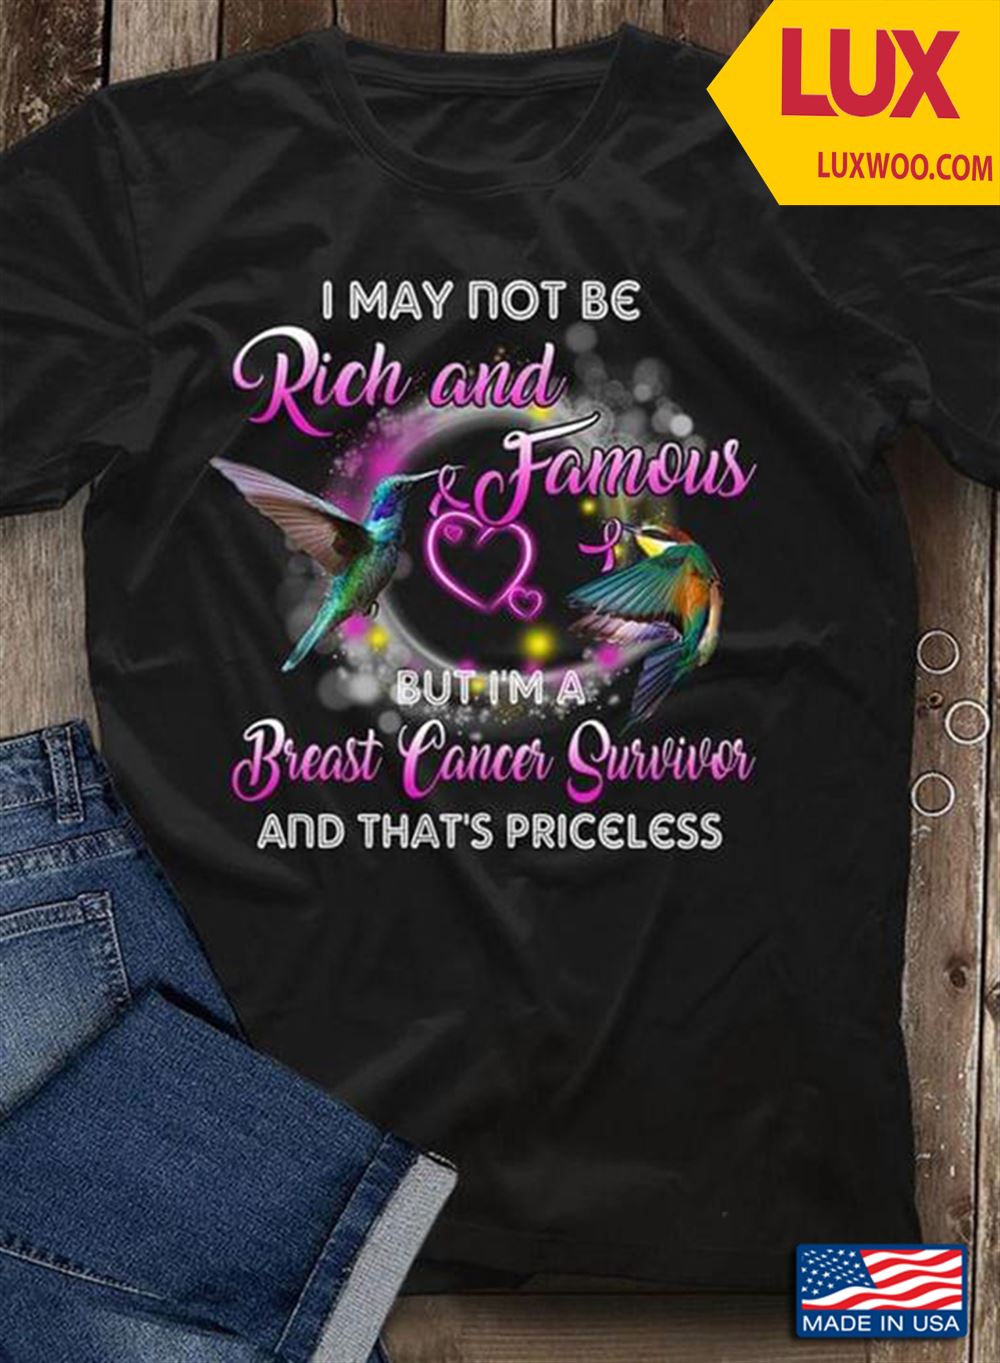 I May Not Be Rich And Famous But Im A Breast Cancer Survivor And Thats Priceless Tshirt Size Up To 5xl